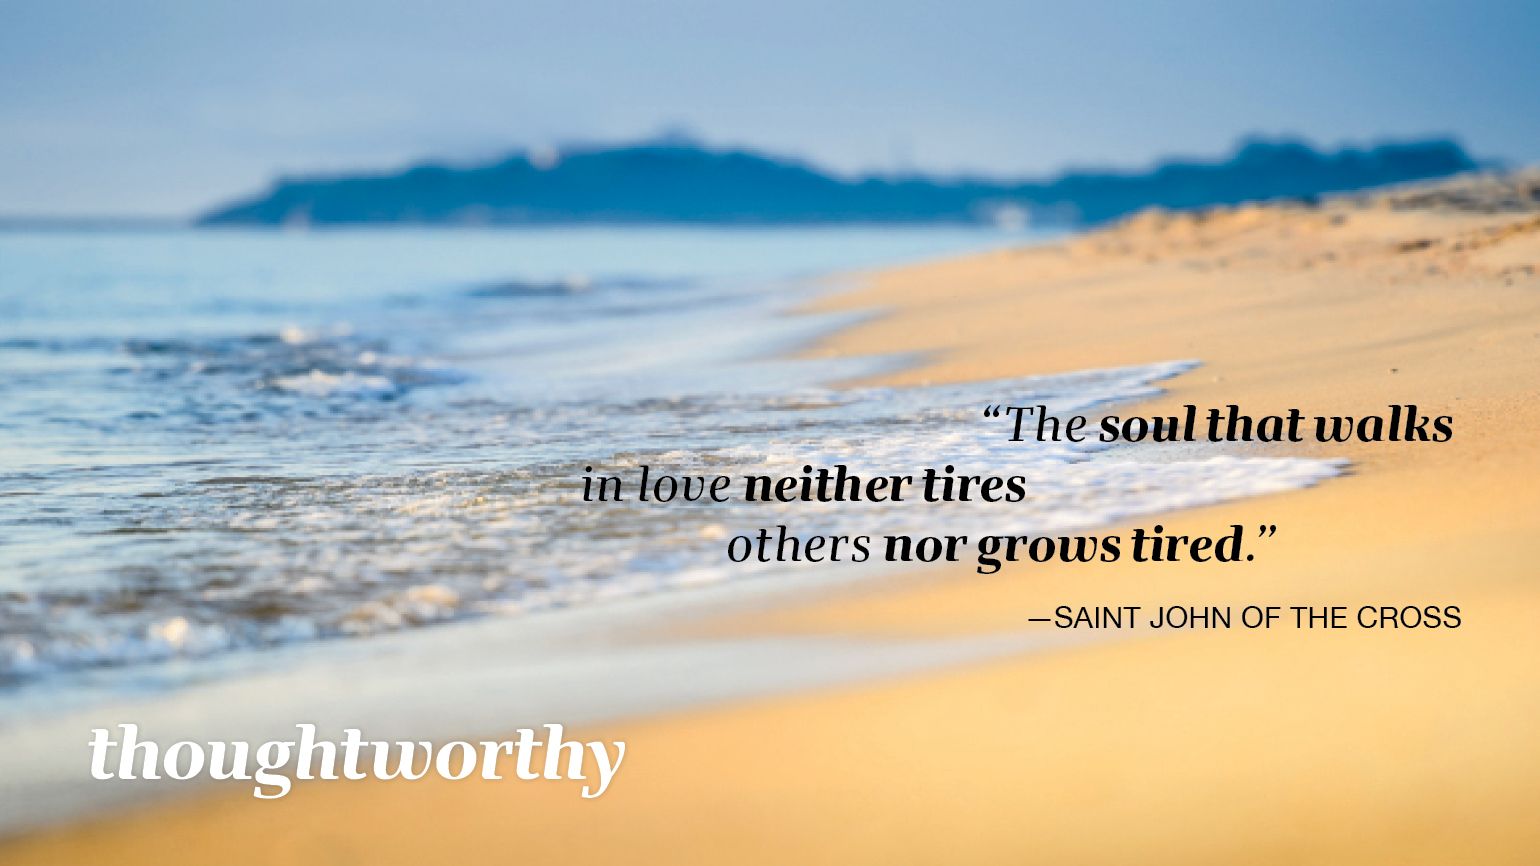 “The soul that walks in love neither tires others nor grows tired.” —Saint John of the Cross